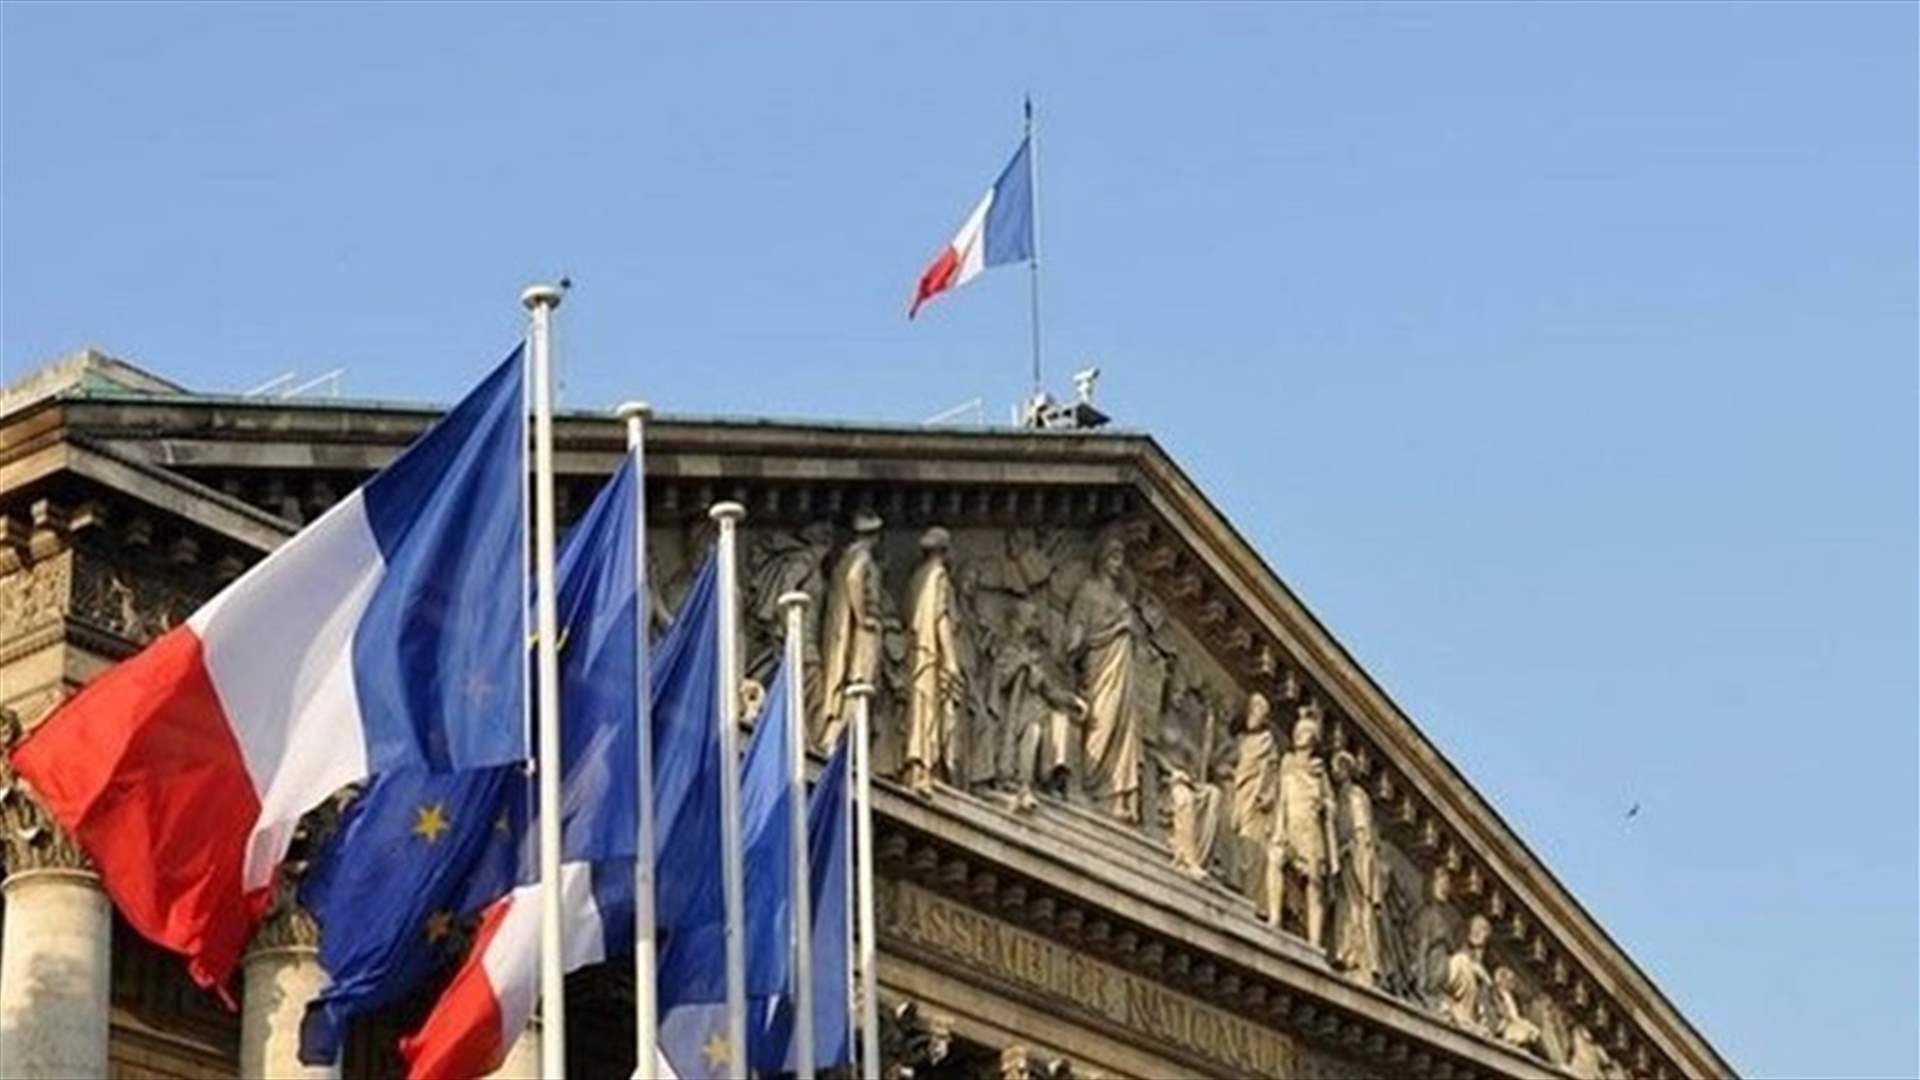 France calls for respecting the Lebanese people’s right to protest, implementing reforms